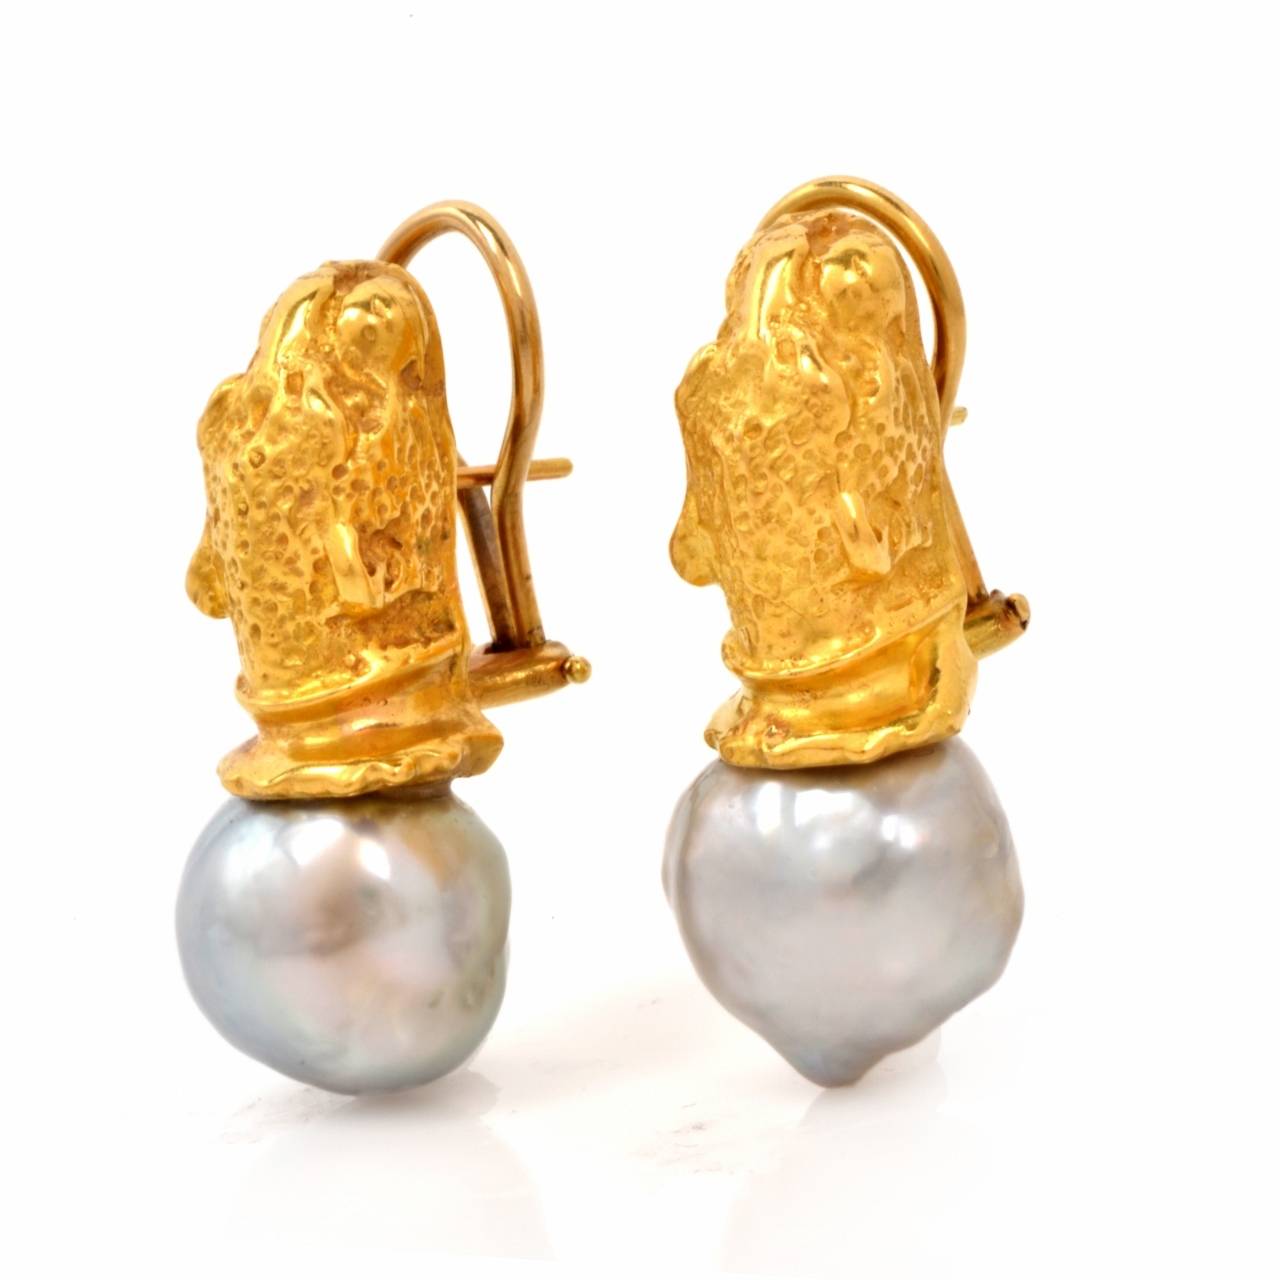 These enchanting clip-back earrings with a pair of natural  Baroque pearls and elaborately detailed 18K yellow gold panther heads weigh 20.1 grams and measure 33 mm long.  The lustrous Baroque pearls measure approx. 13 mm in length  and are of a